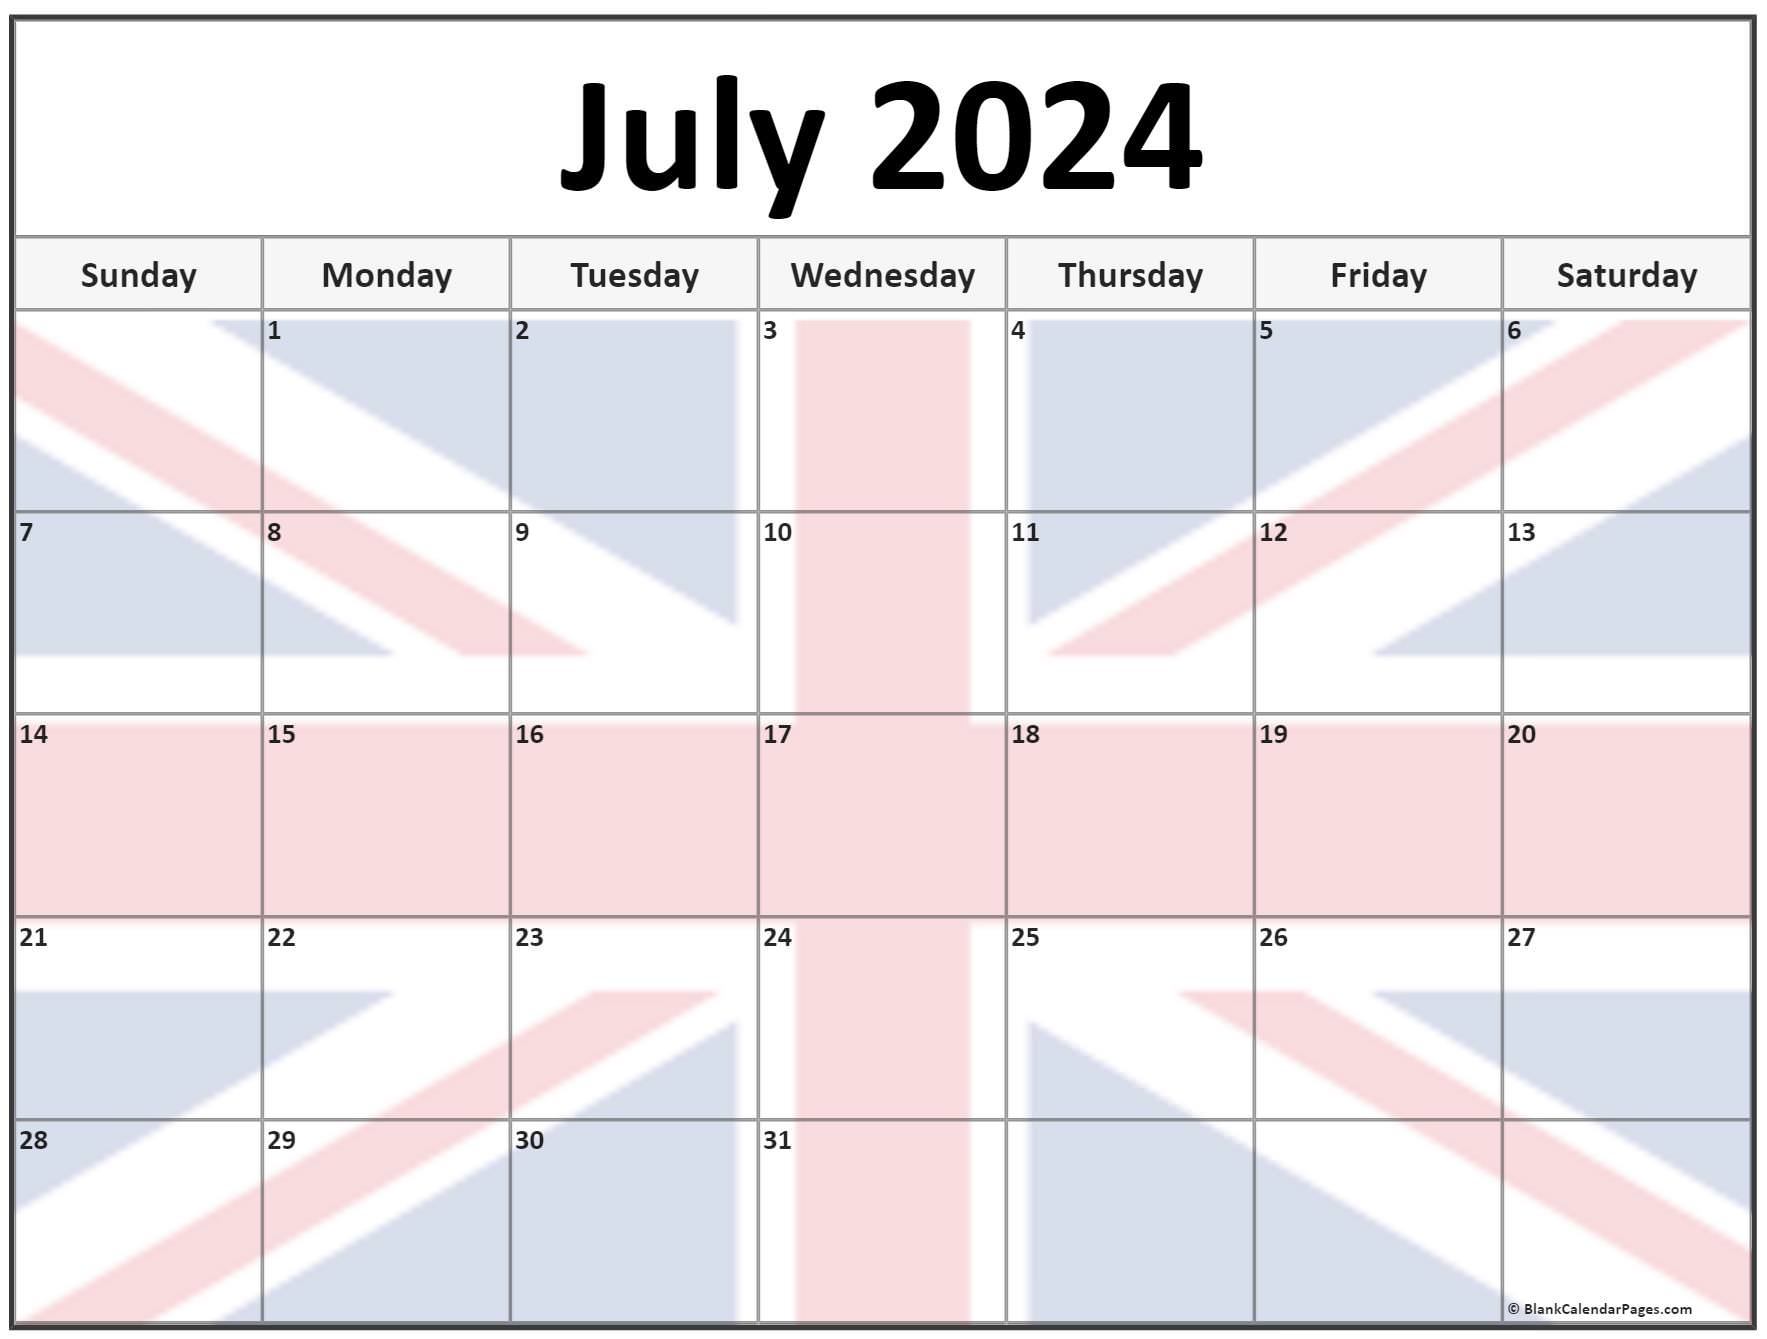 Collection of July 2023 photo calendars with image filters.